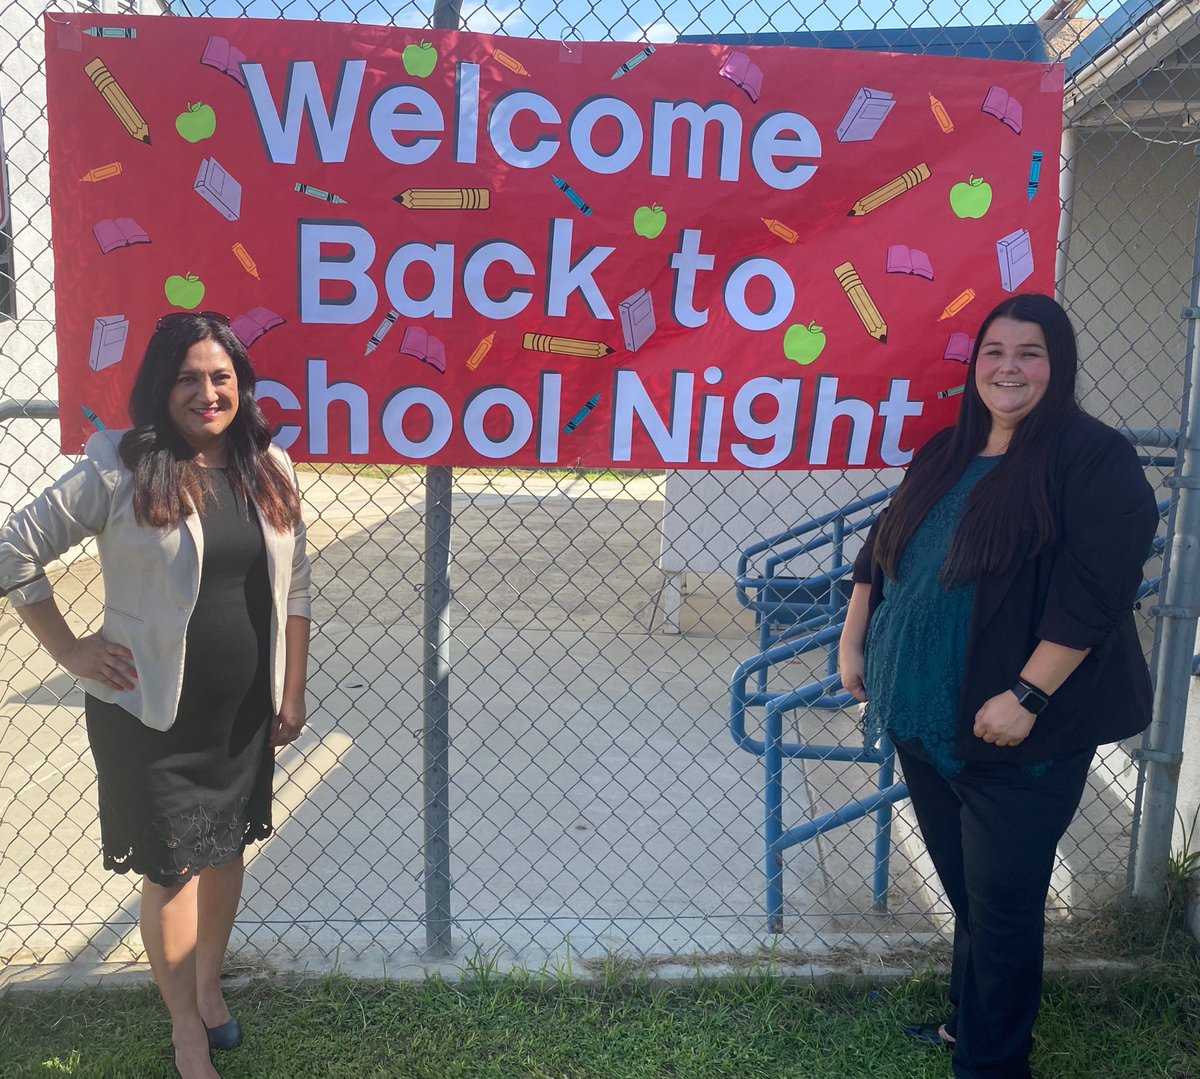 Ready and excited for our Back to School Nigh at Lamont Elementary School.  Join us starting at 5:45pm.  #BearCubFamilies #WeAreLESD  #BackToSchoolNight 22-23! @nrodriguez4672